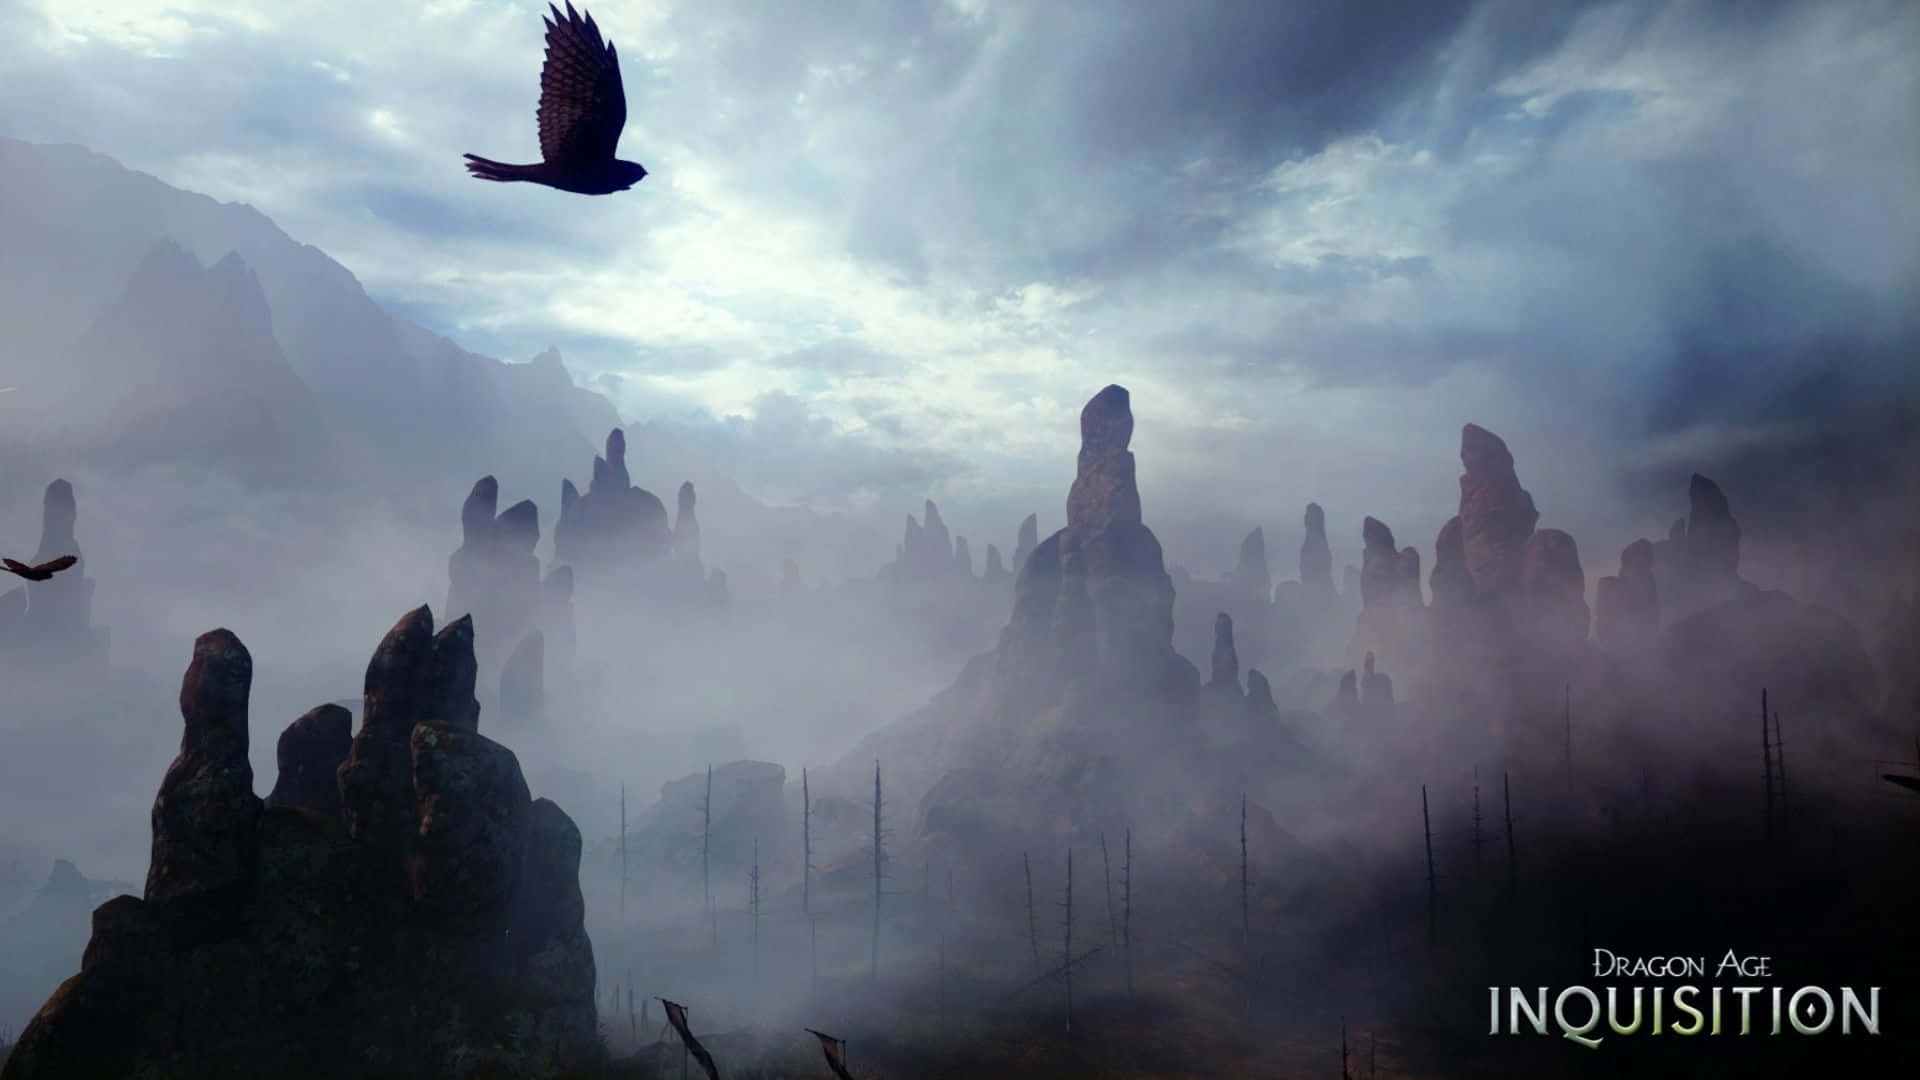 Stone Mountain Hd Dragon Age Inquisition Background